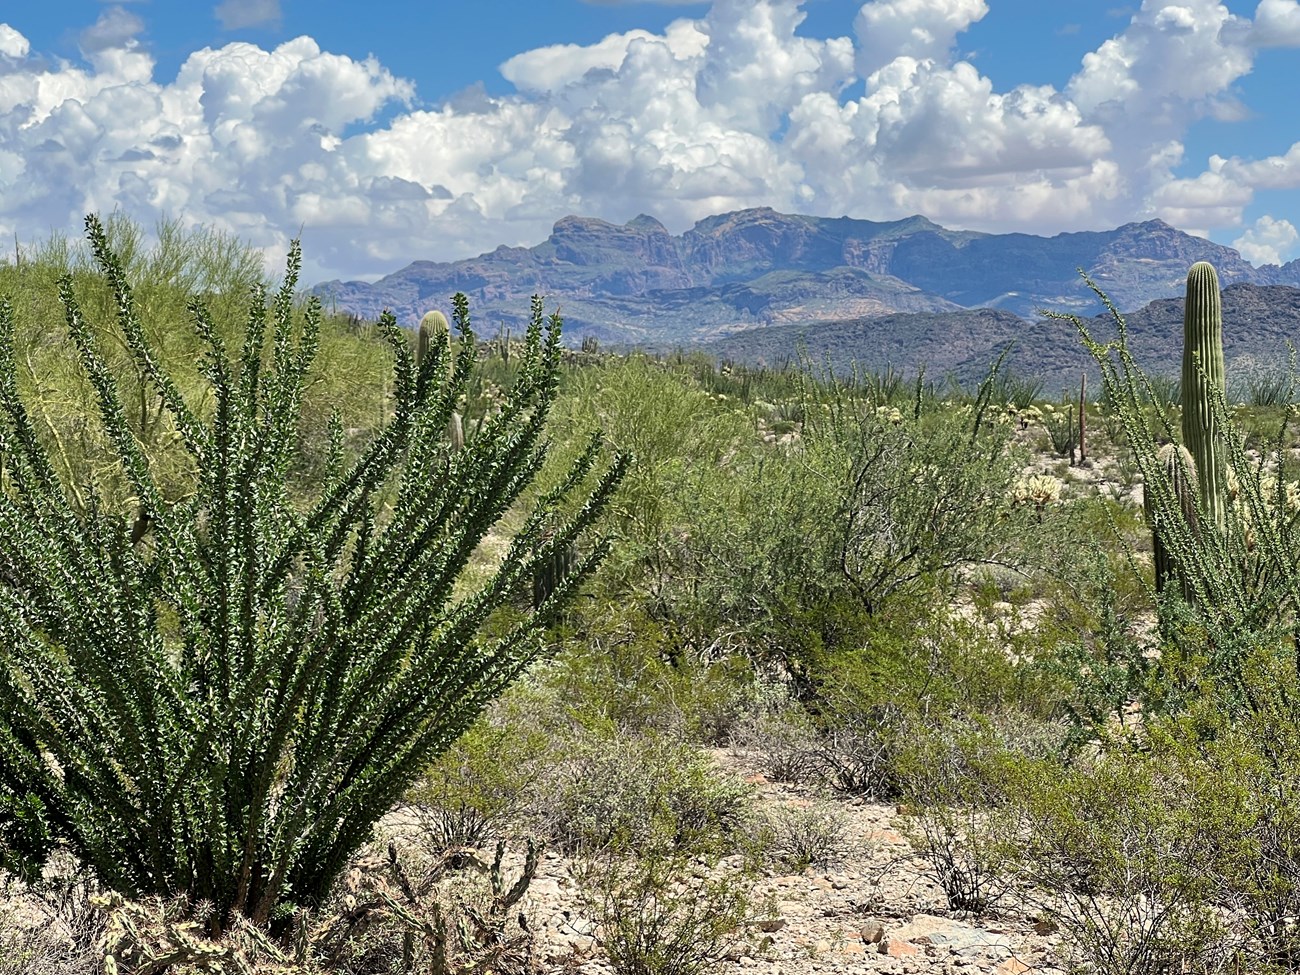 An ocotillo and lush desert plants with a view of the Organ Pipe Cactus wilderness.